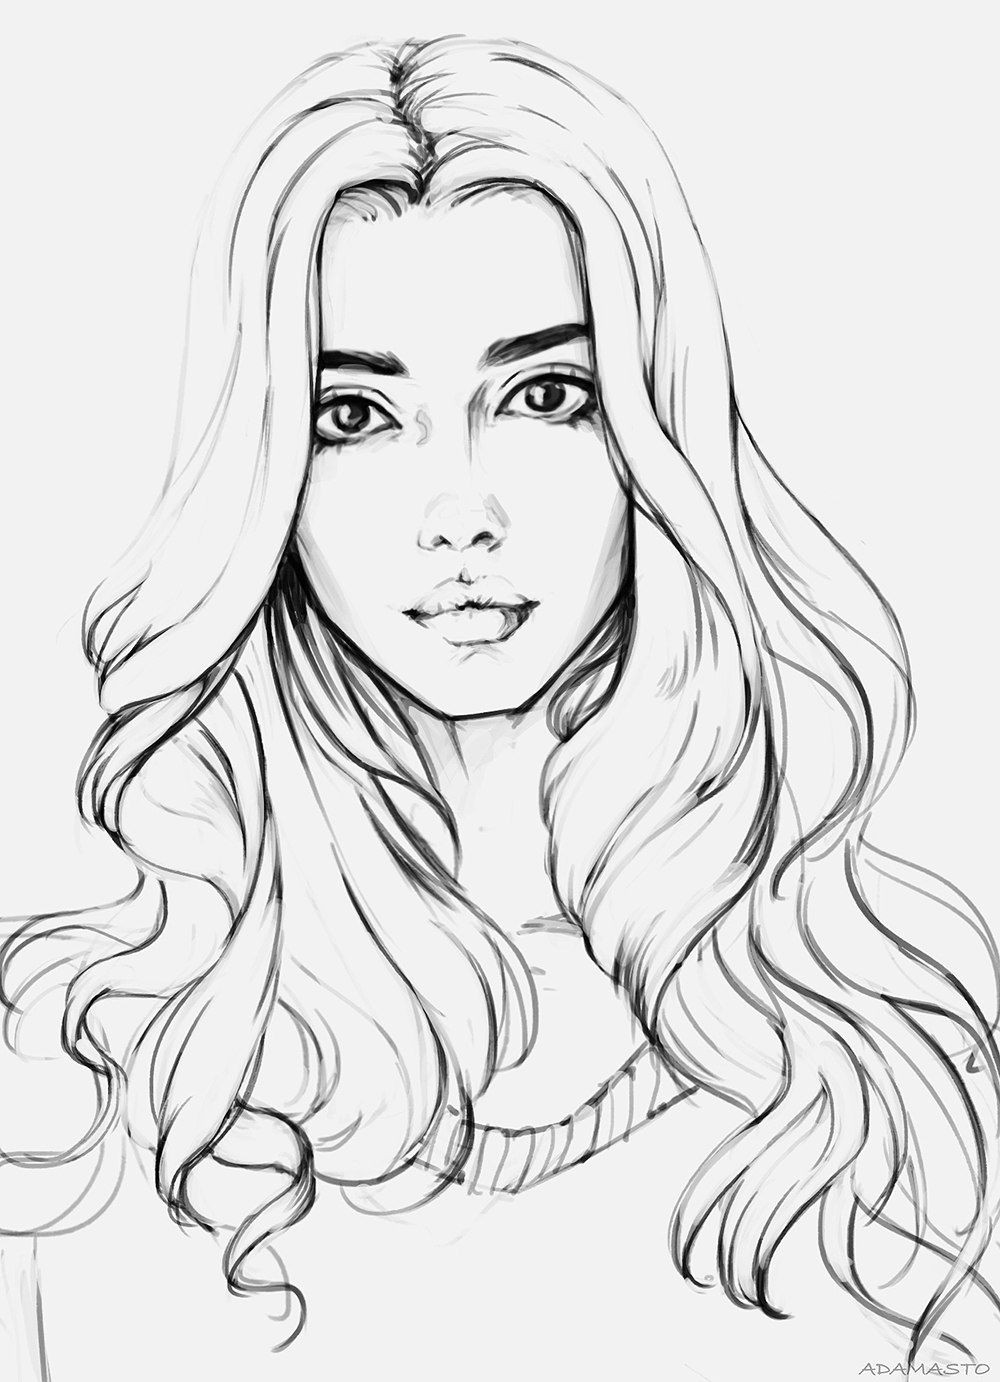 Coloring Pages Girls Faces
 Adamasto s photos – 17 albums Art in 2019